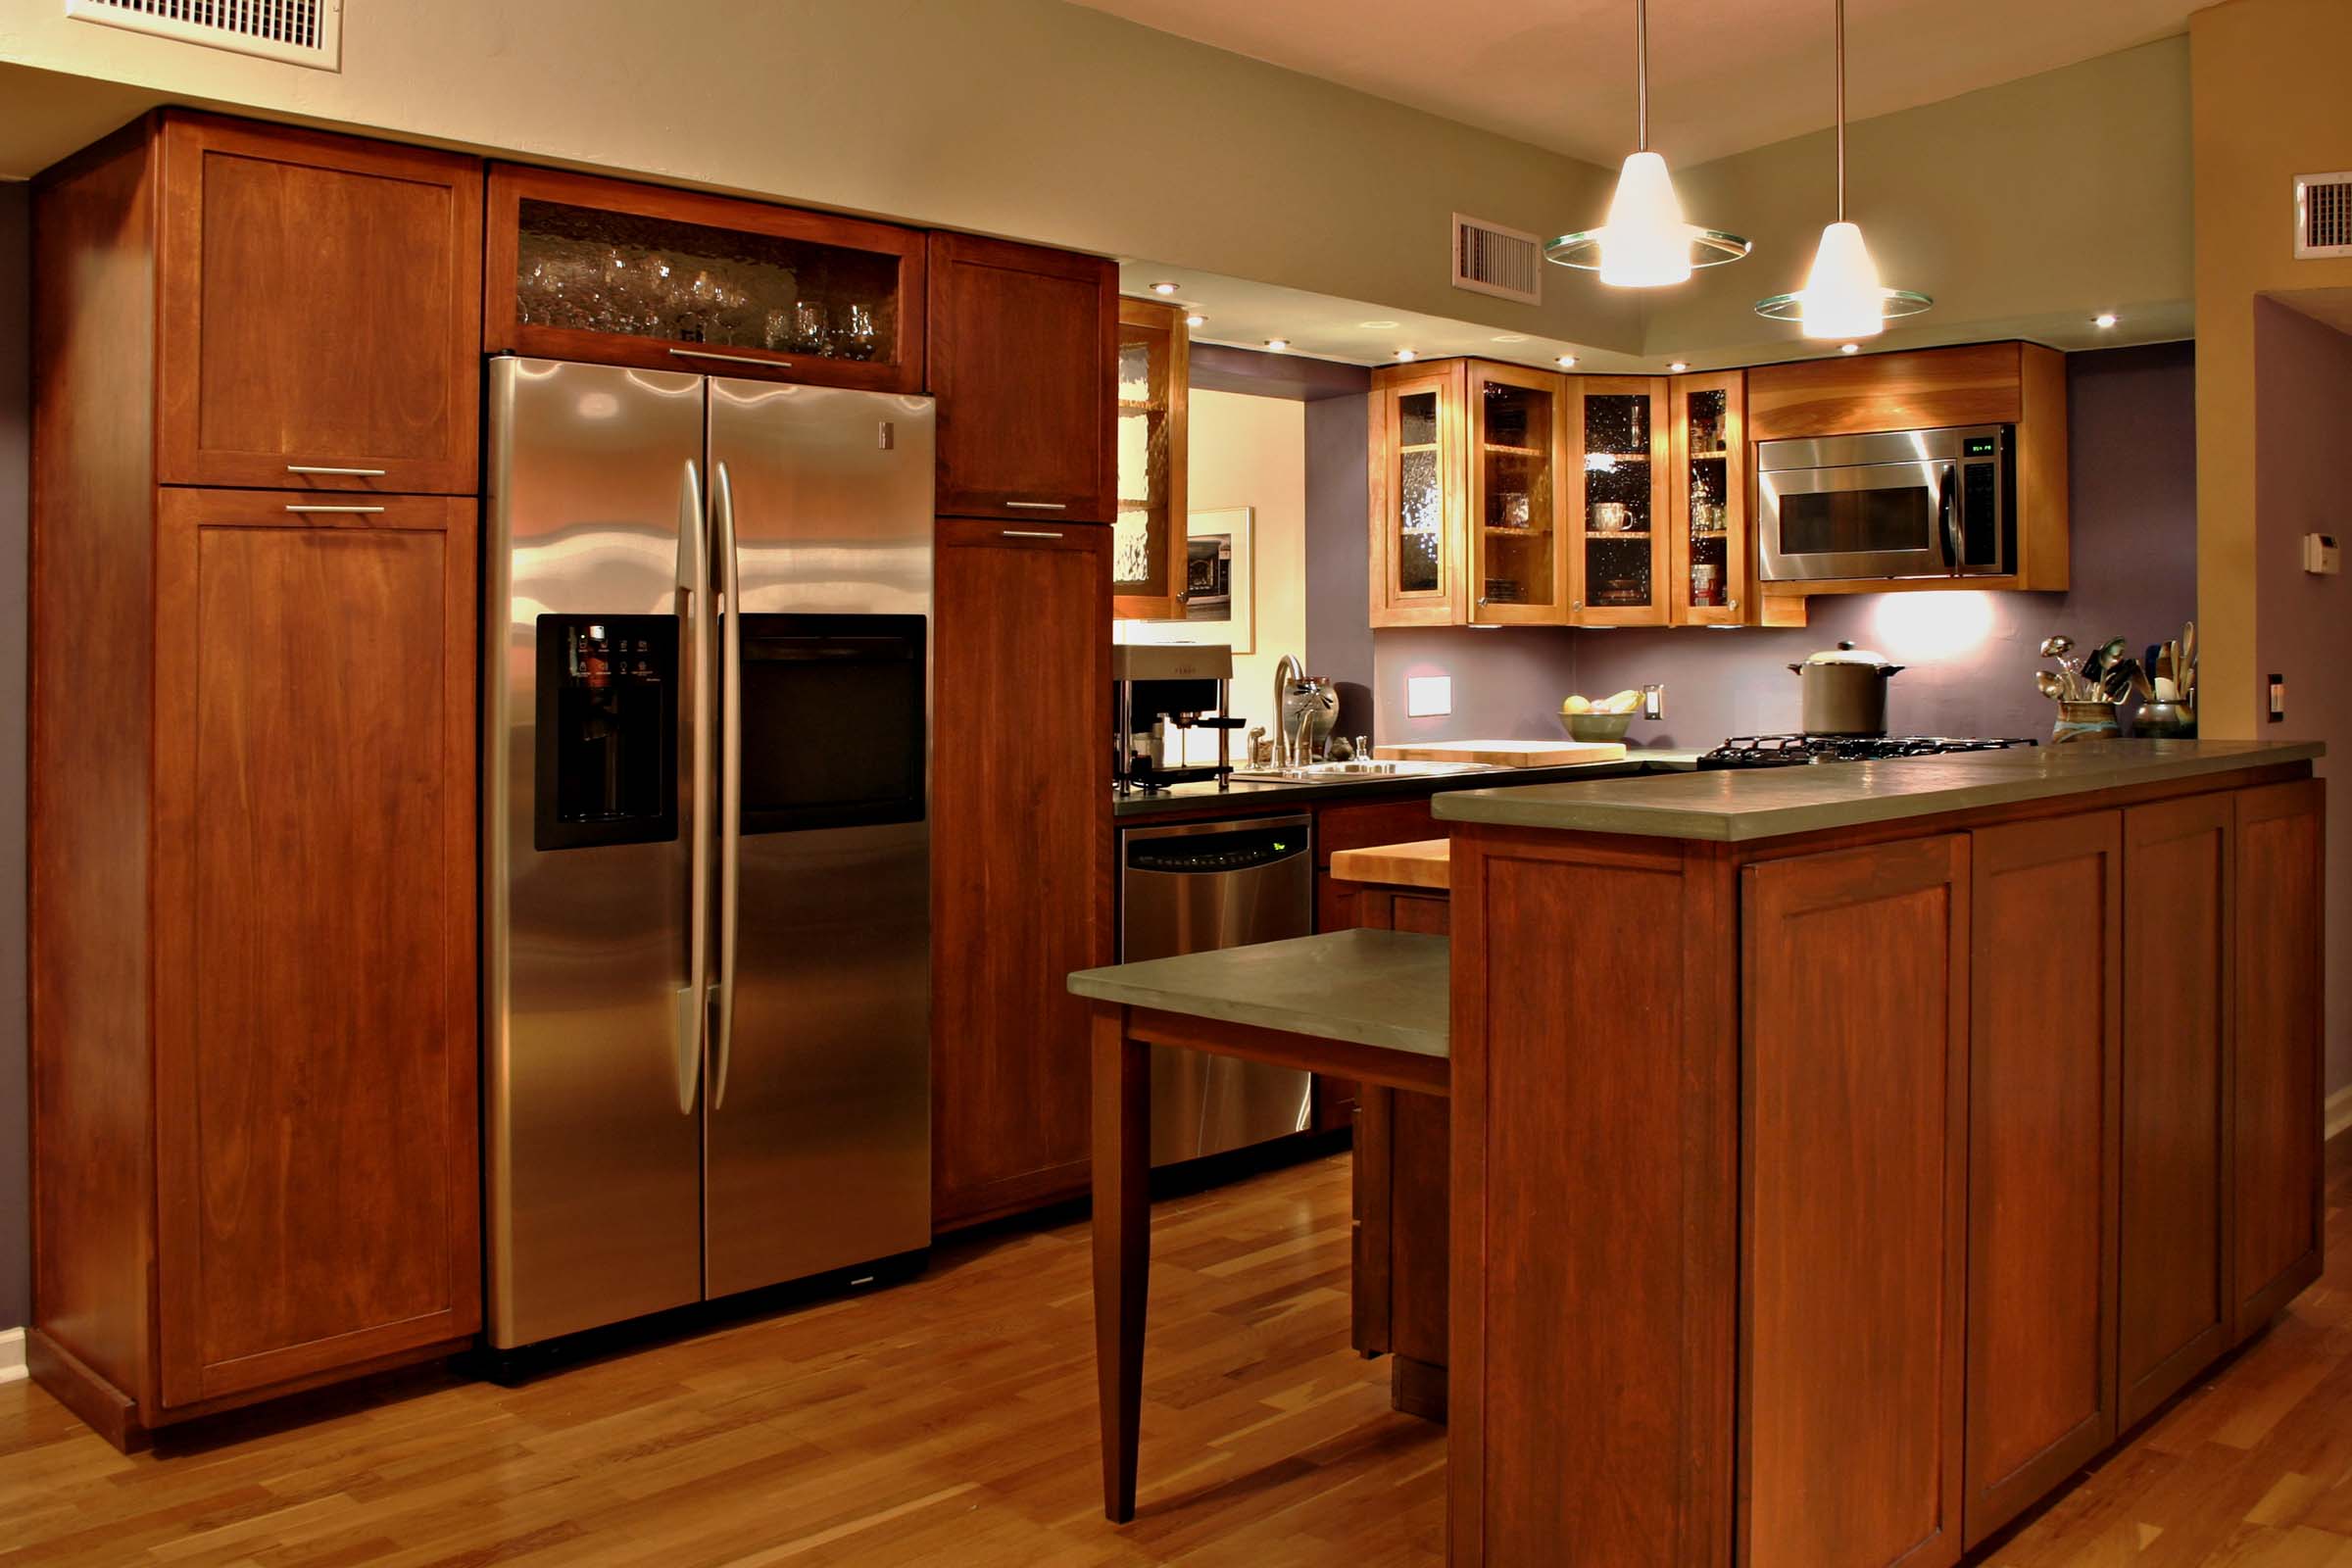 Why Buy Luxury And High End Kitchen Appliances By Joe Szabo